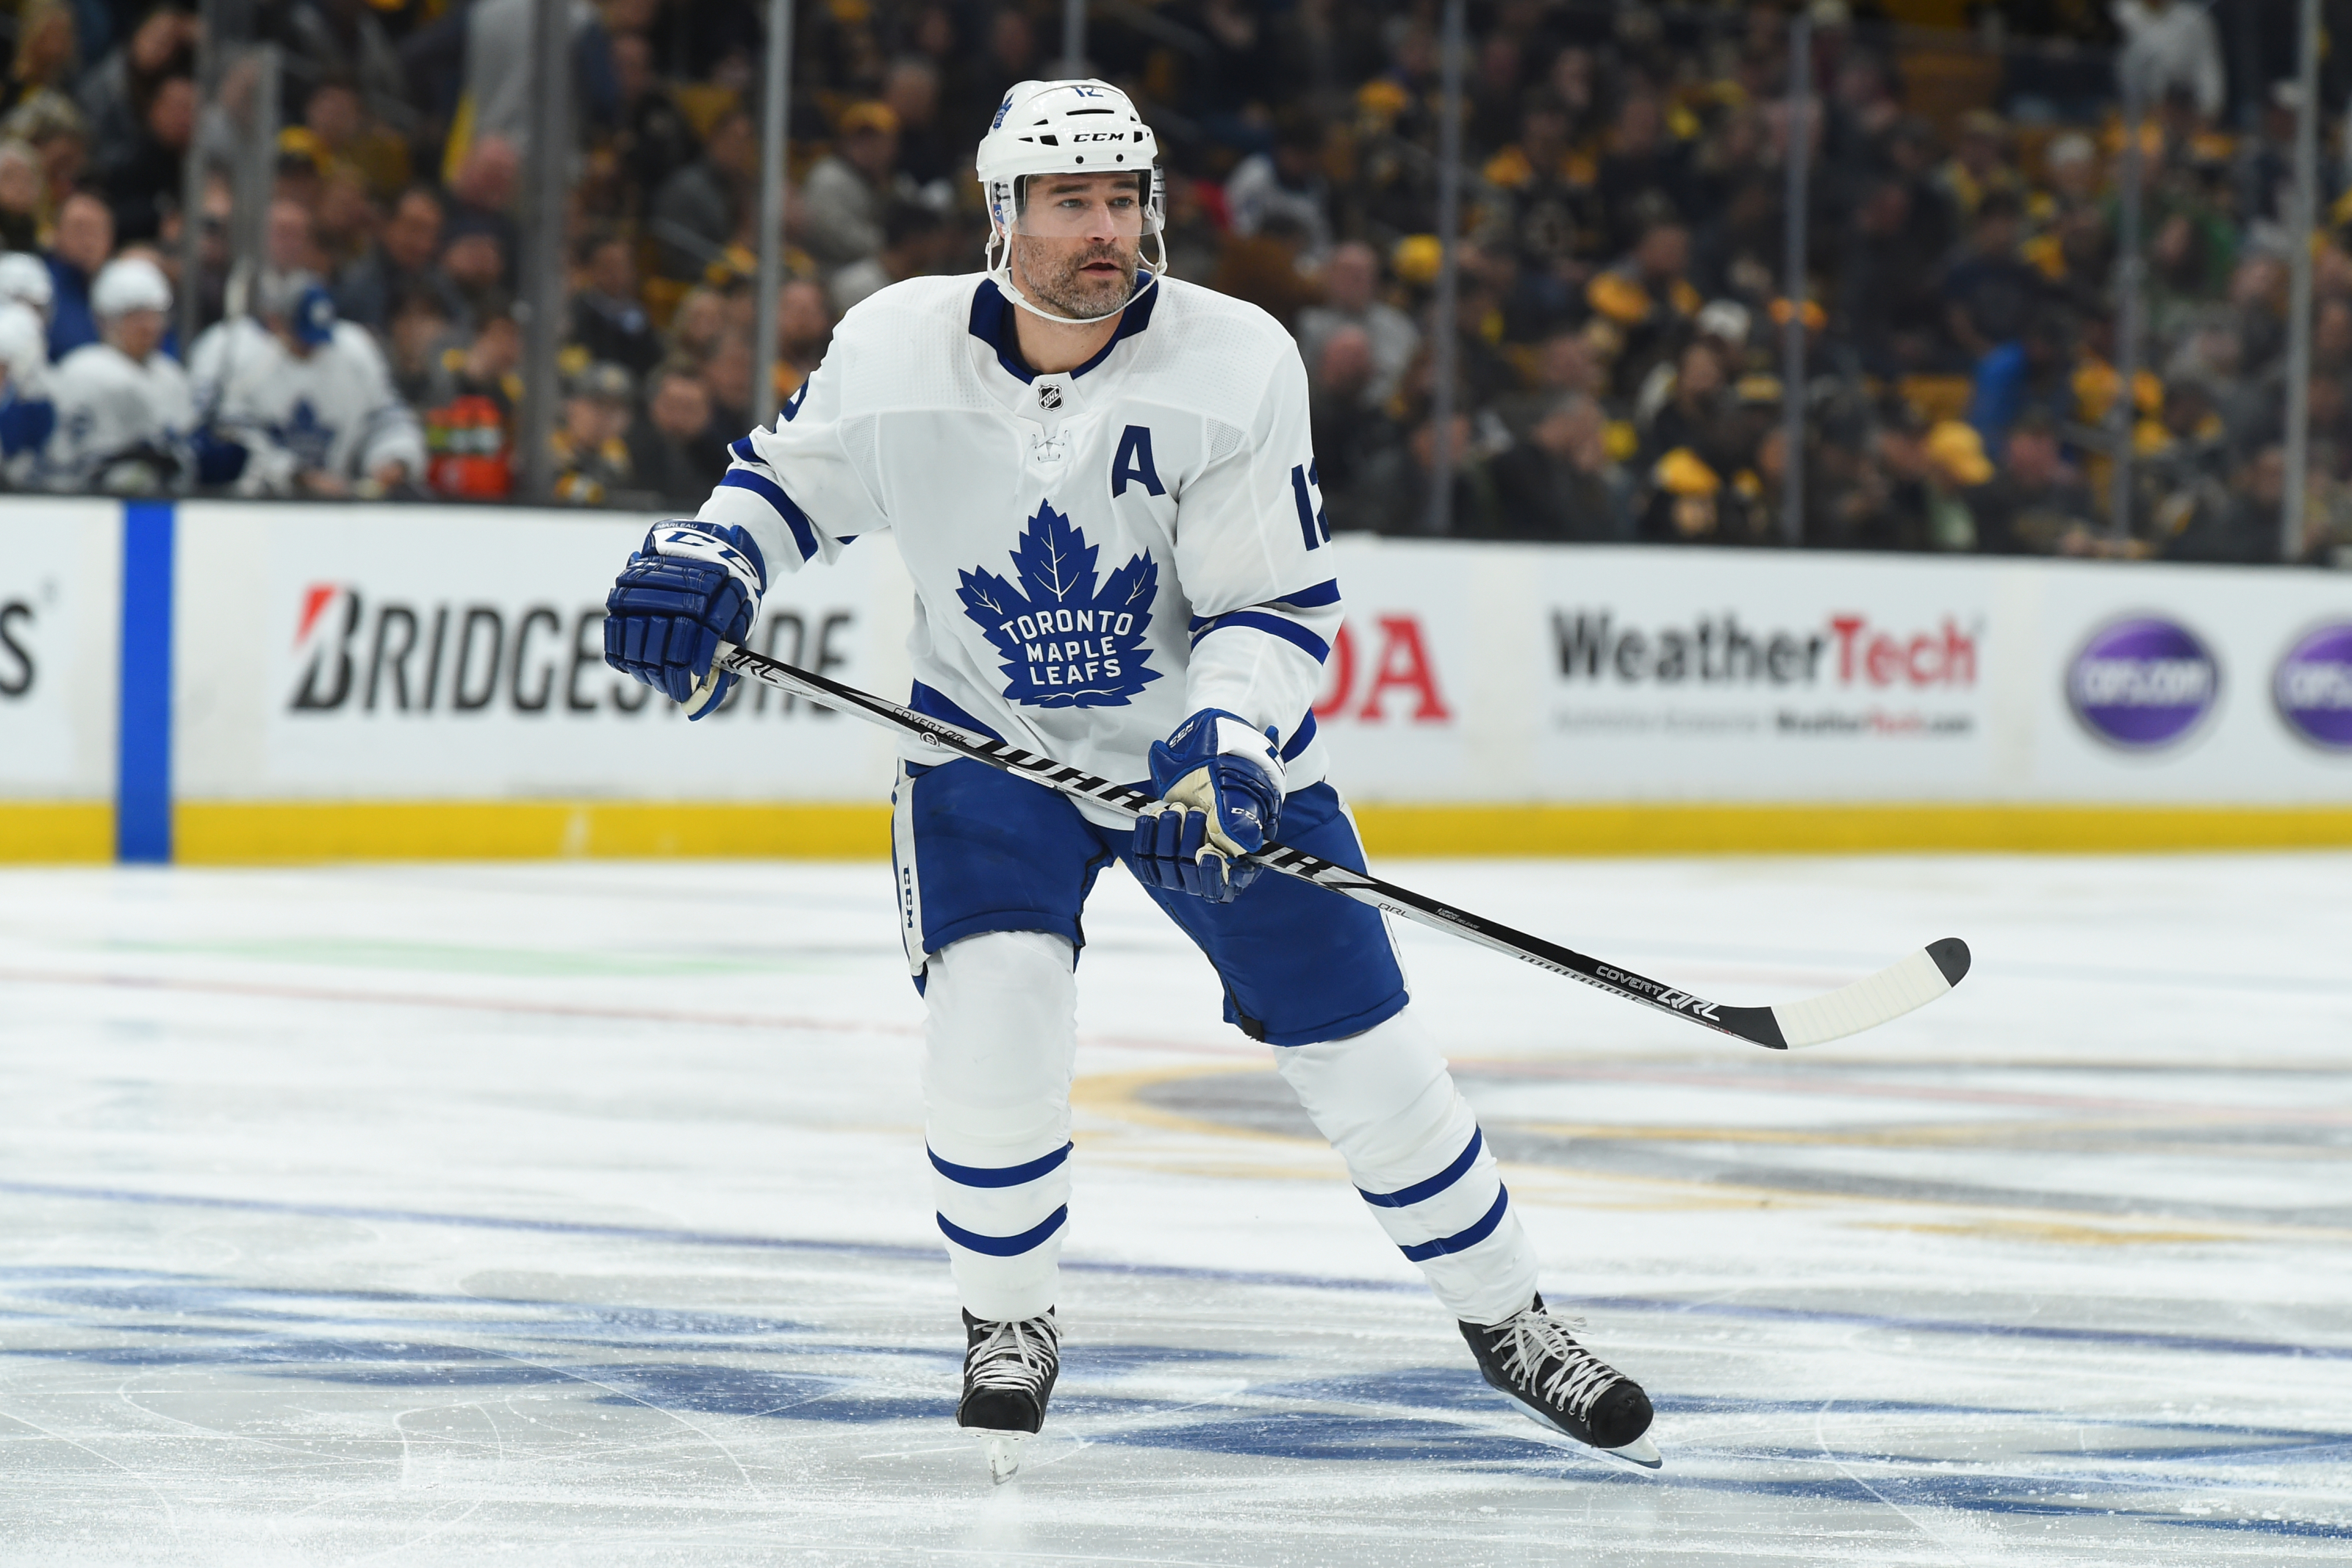 Toronto Maple Leafs reportedly talk with Kings about Patrick Marleau trade